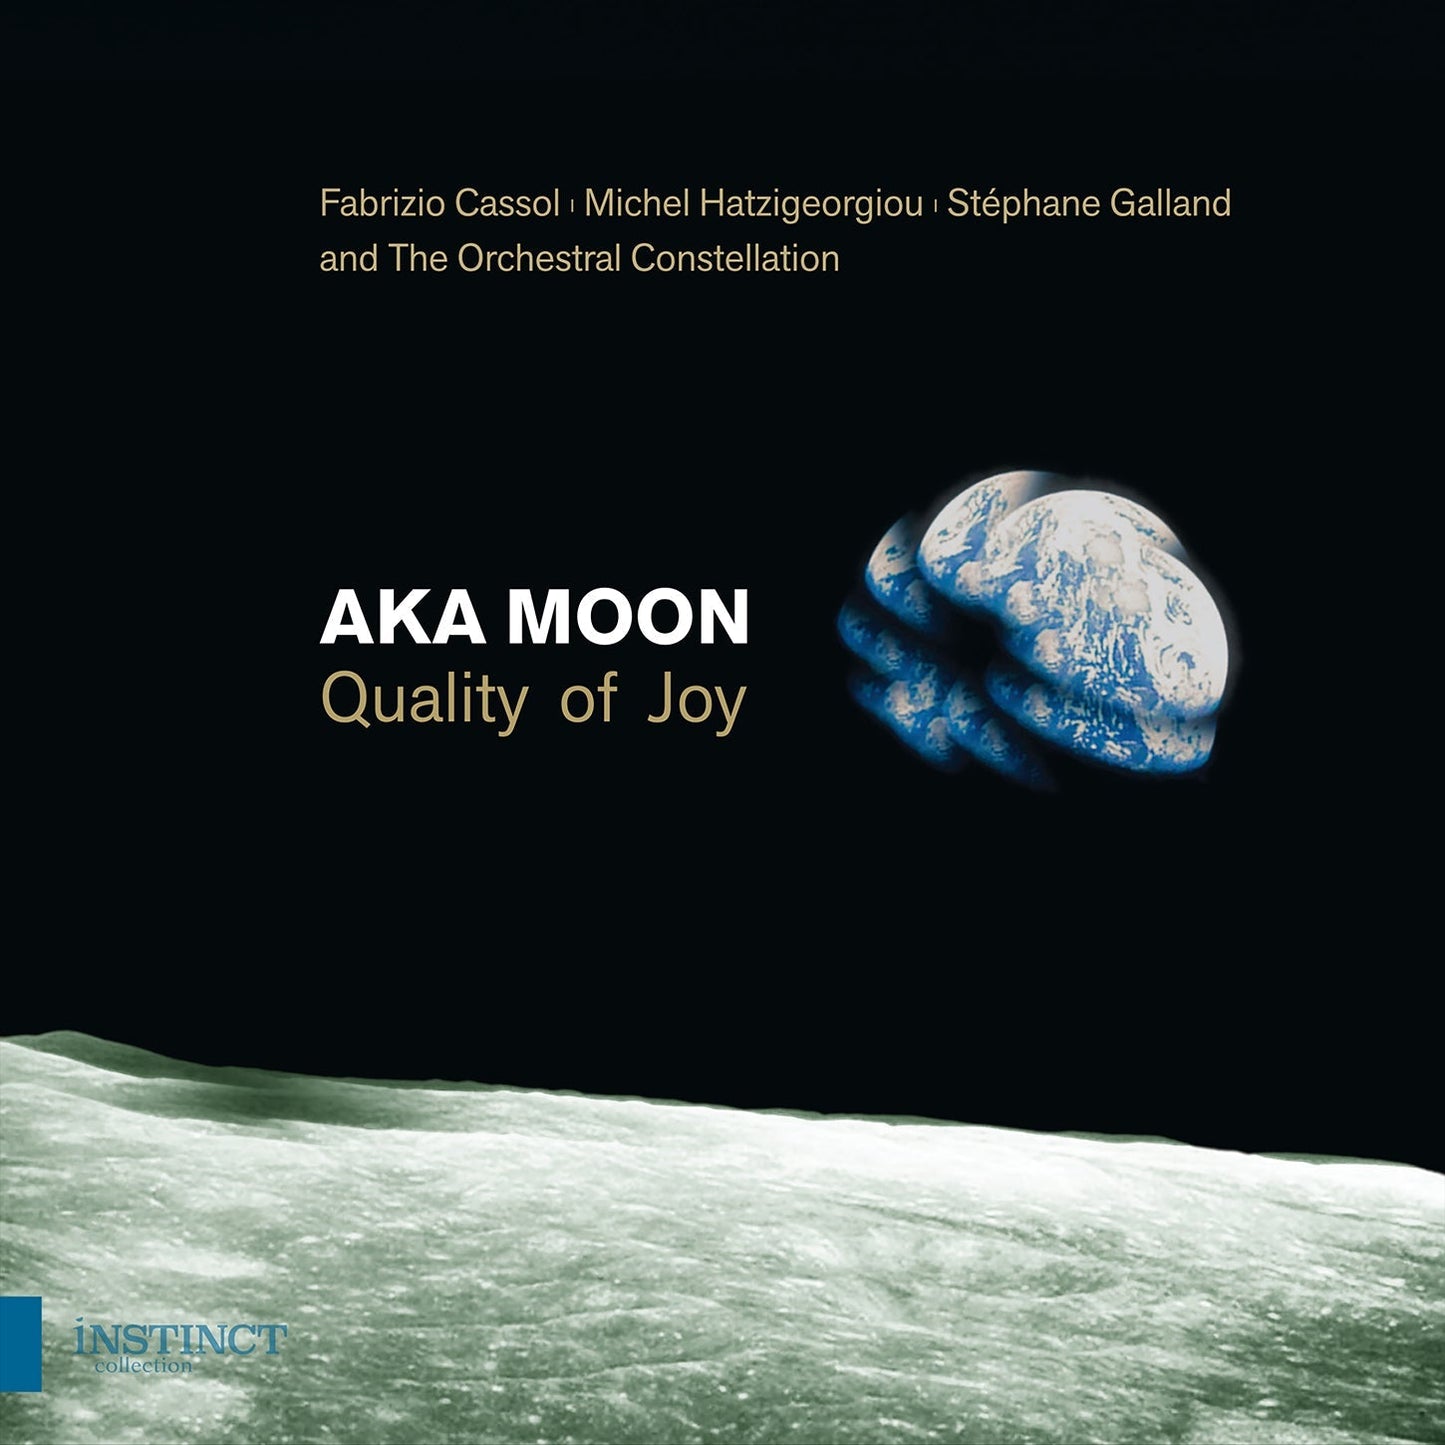 Cassol: Quality Of Joy  Aka Moon, The Orchestral Constellation